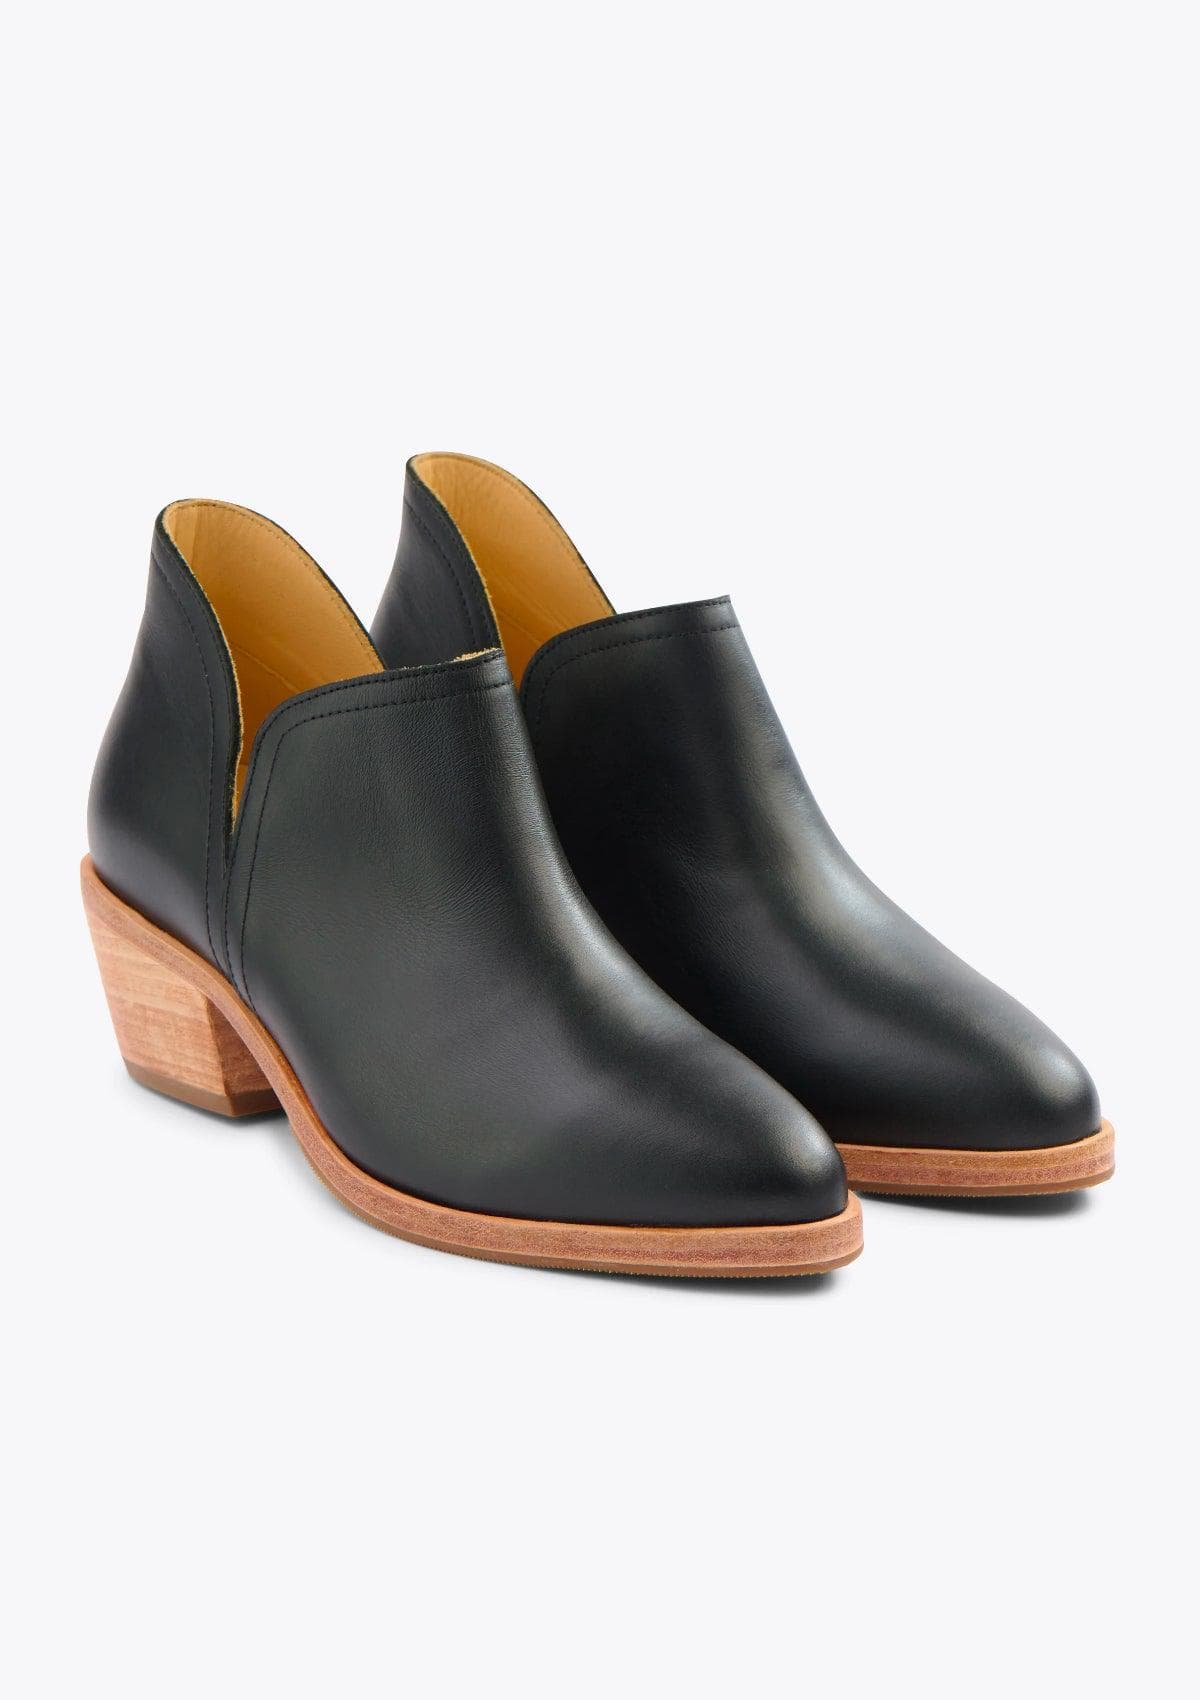 Nisolo Everyday Ankle Bootie - Black